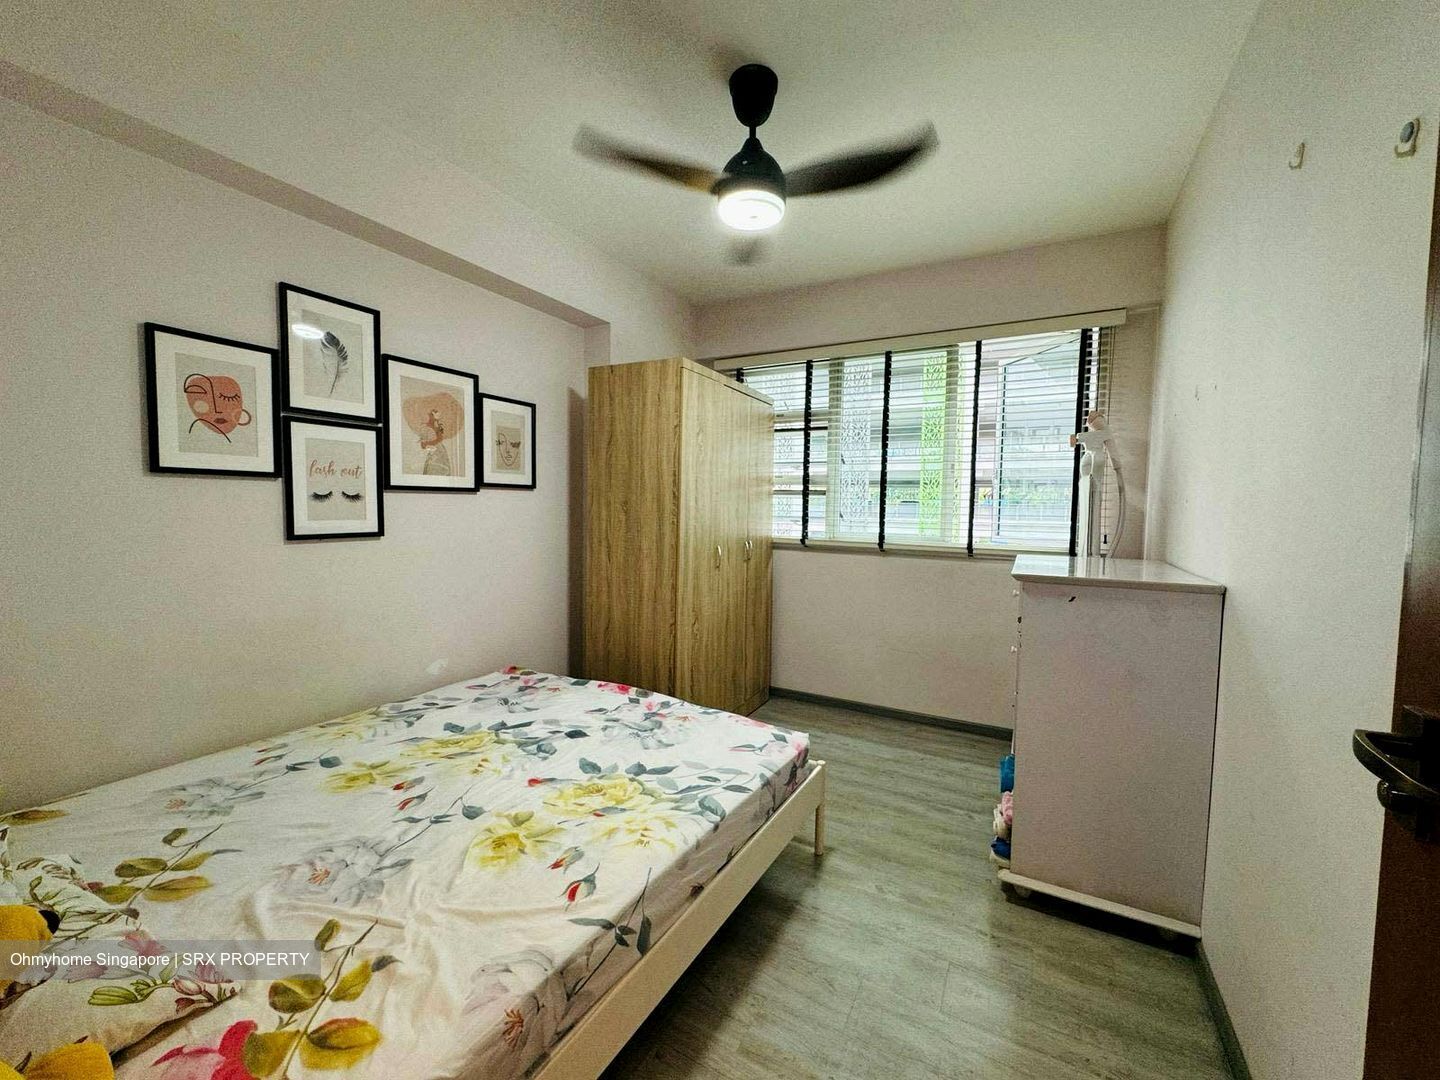 Boon Lay View (Jurong West), Multi Generation #426361391